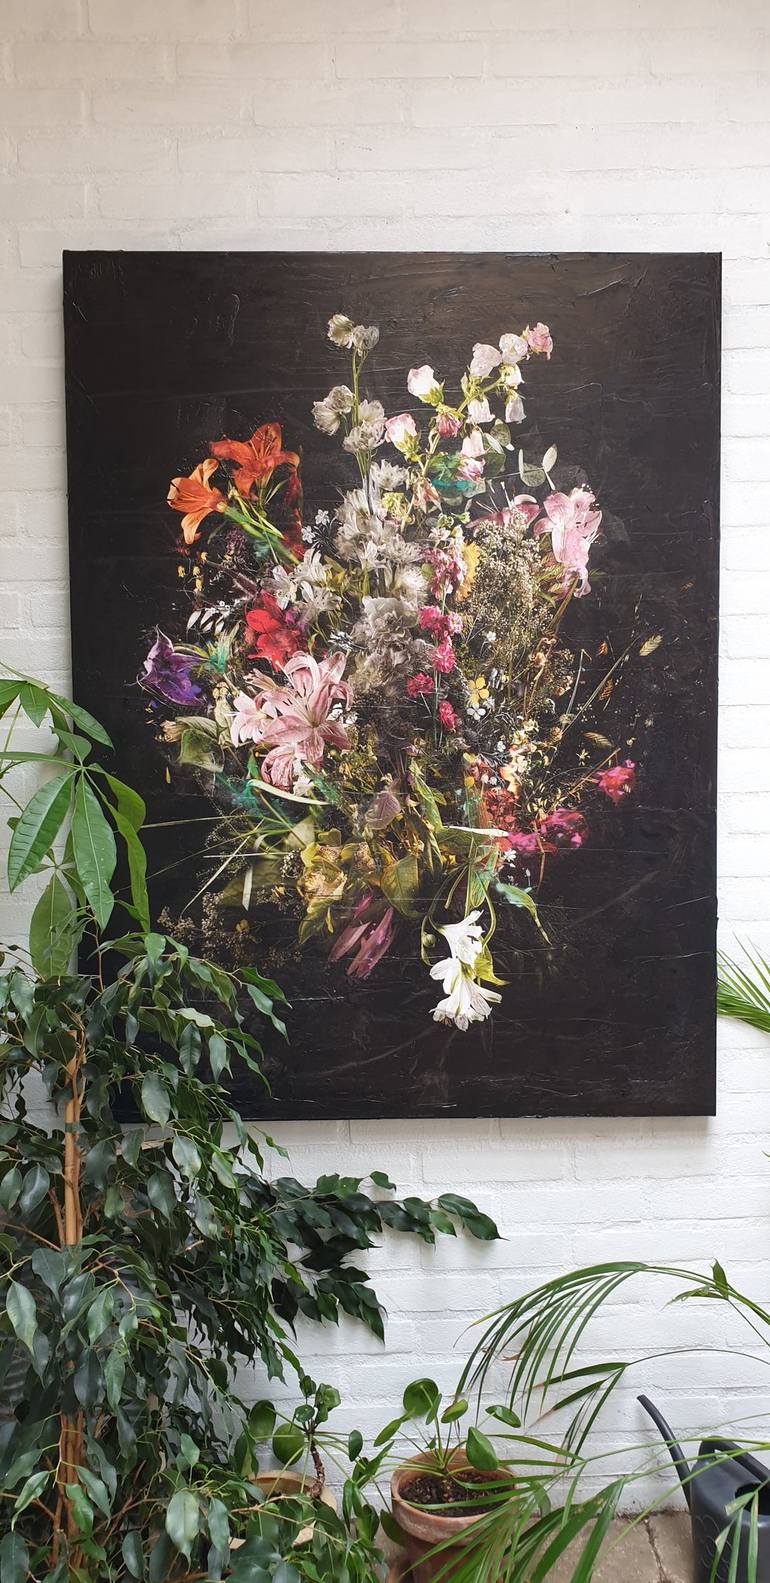 Original Figurative Floral Mixed Media by Teis Albers